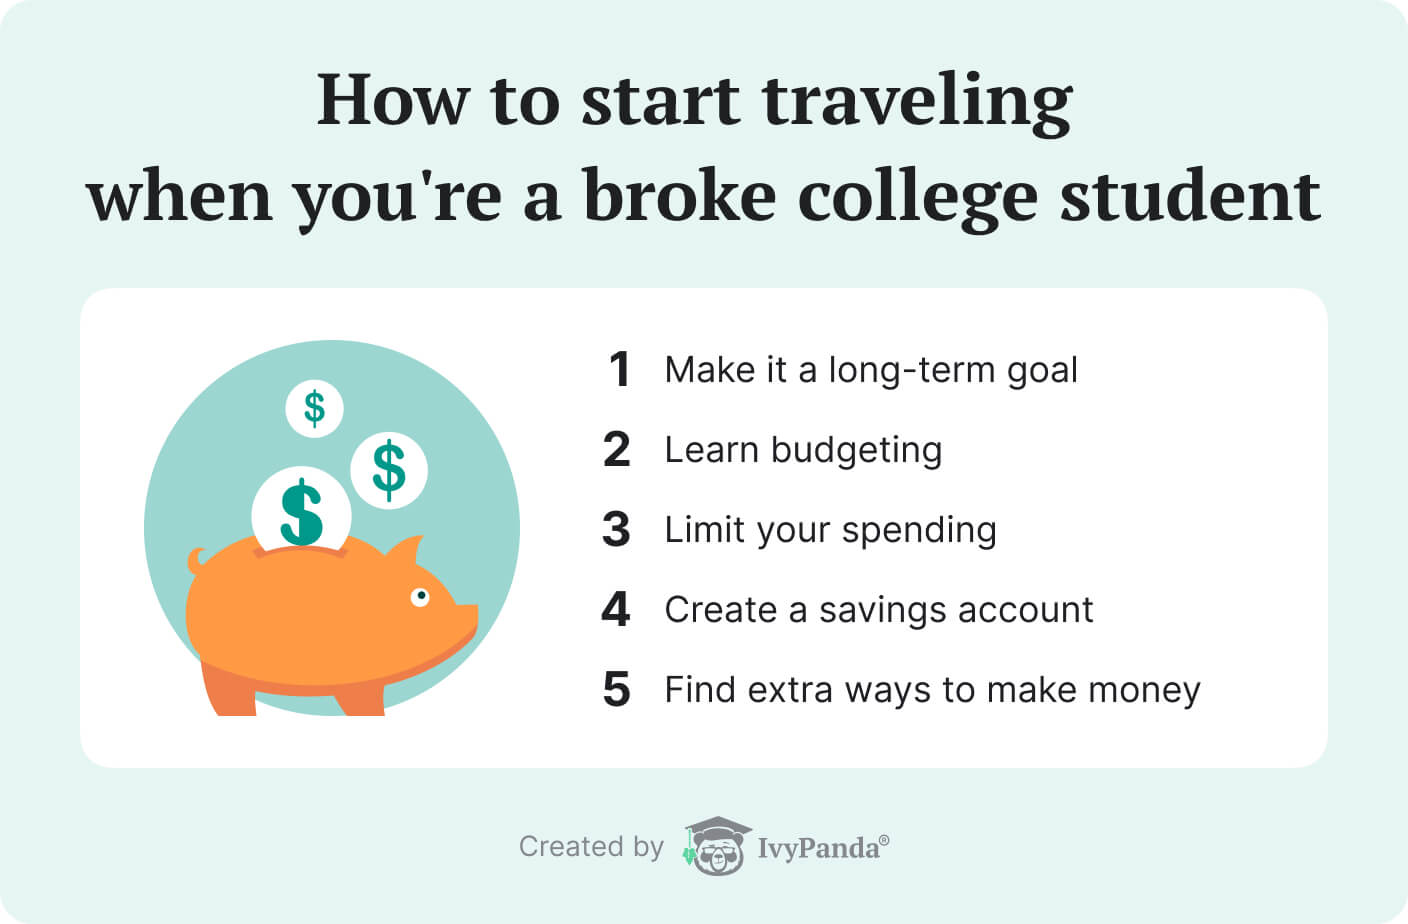 The picture contains a list of tips on budget student traveling.